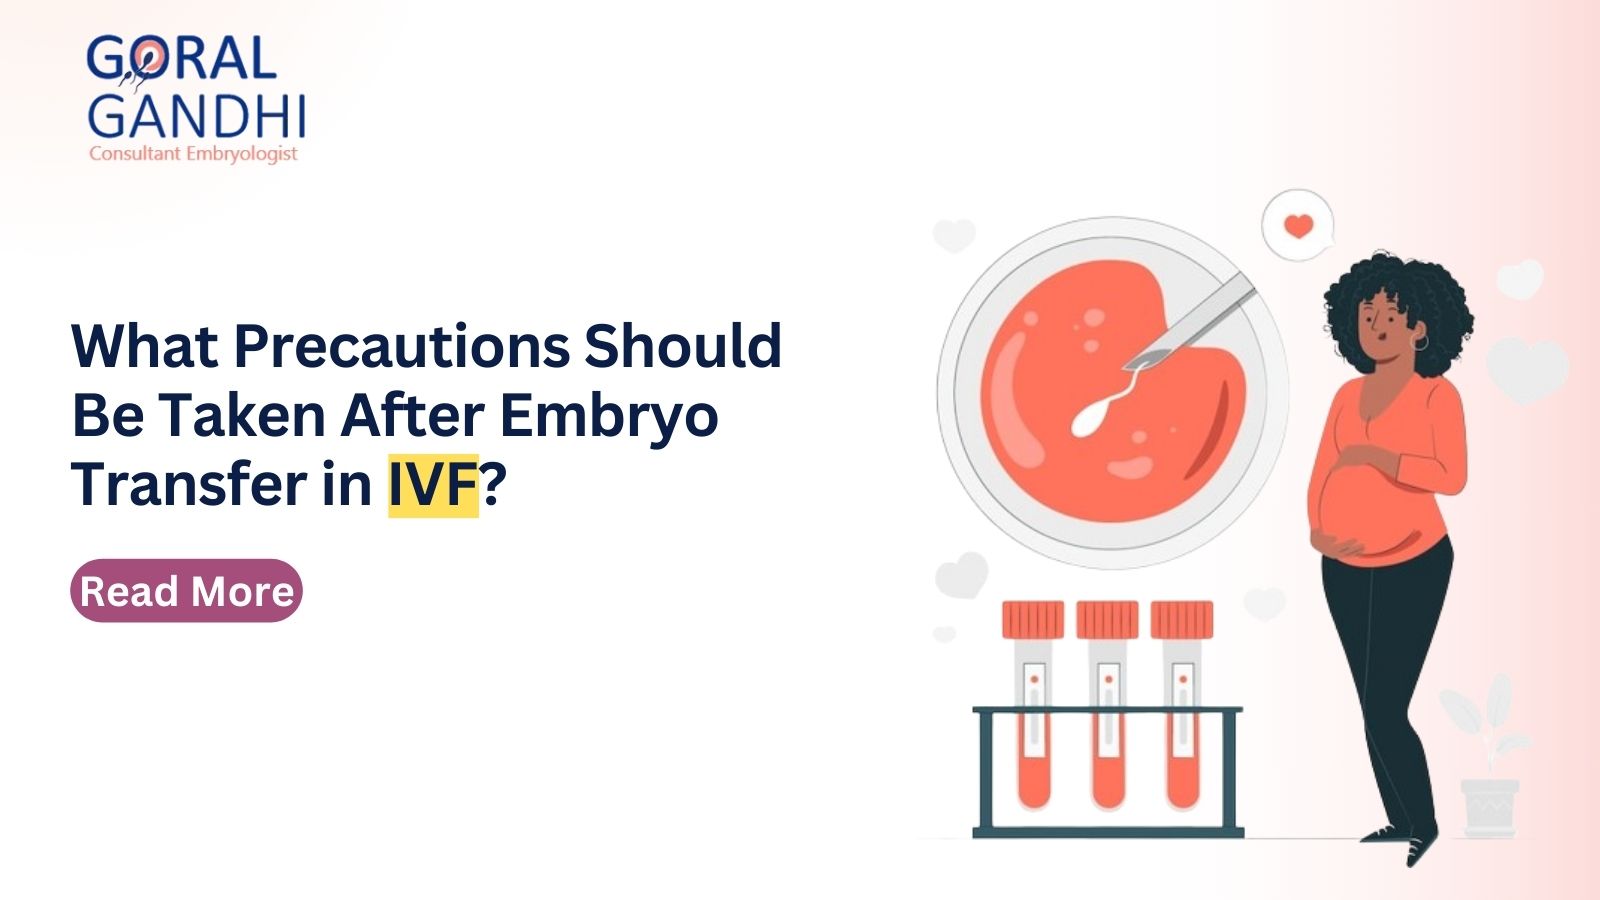 What Precautions Should Be Taken After Embryo Transfer in IVF?